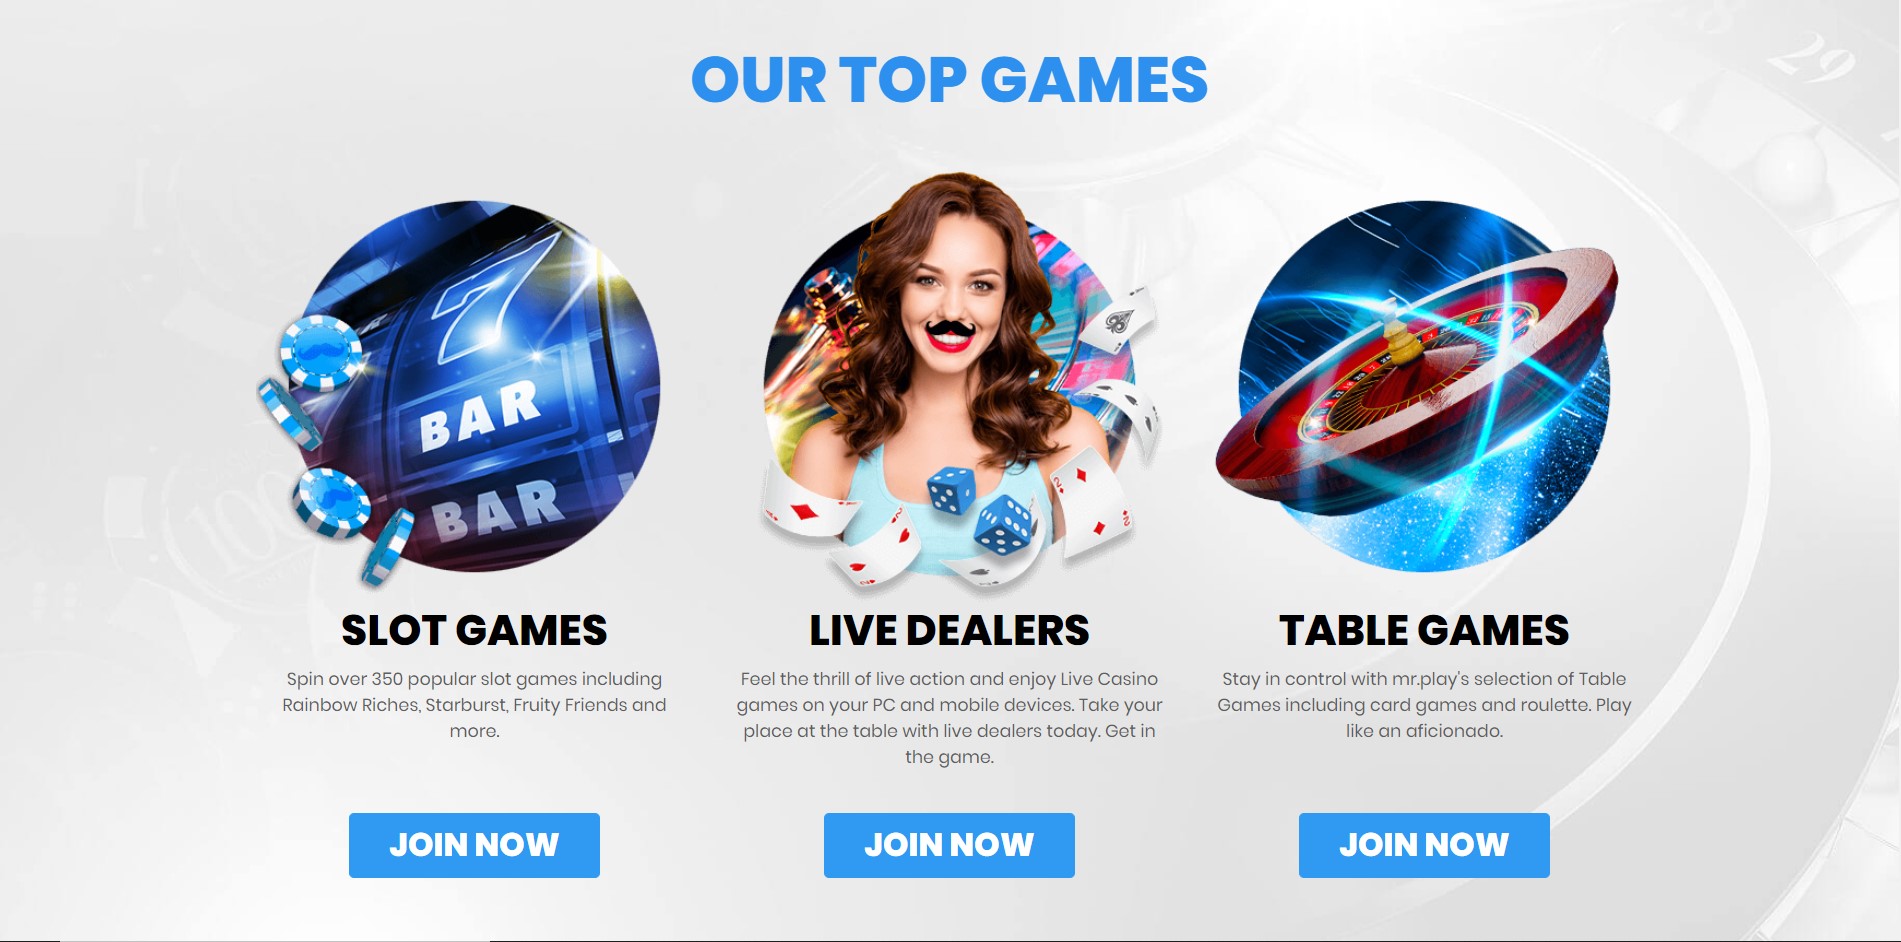 Mr Play Casino Top Games